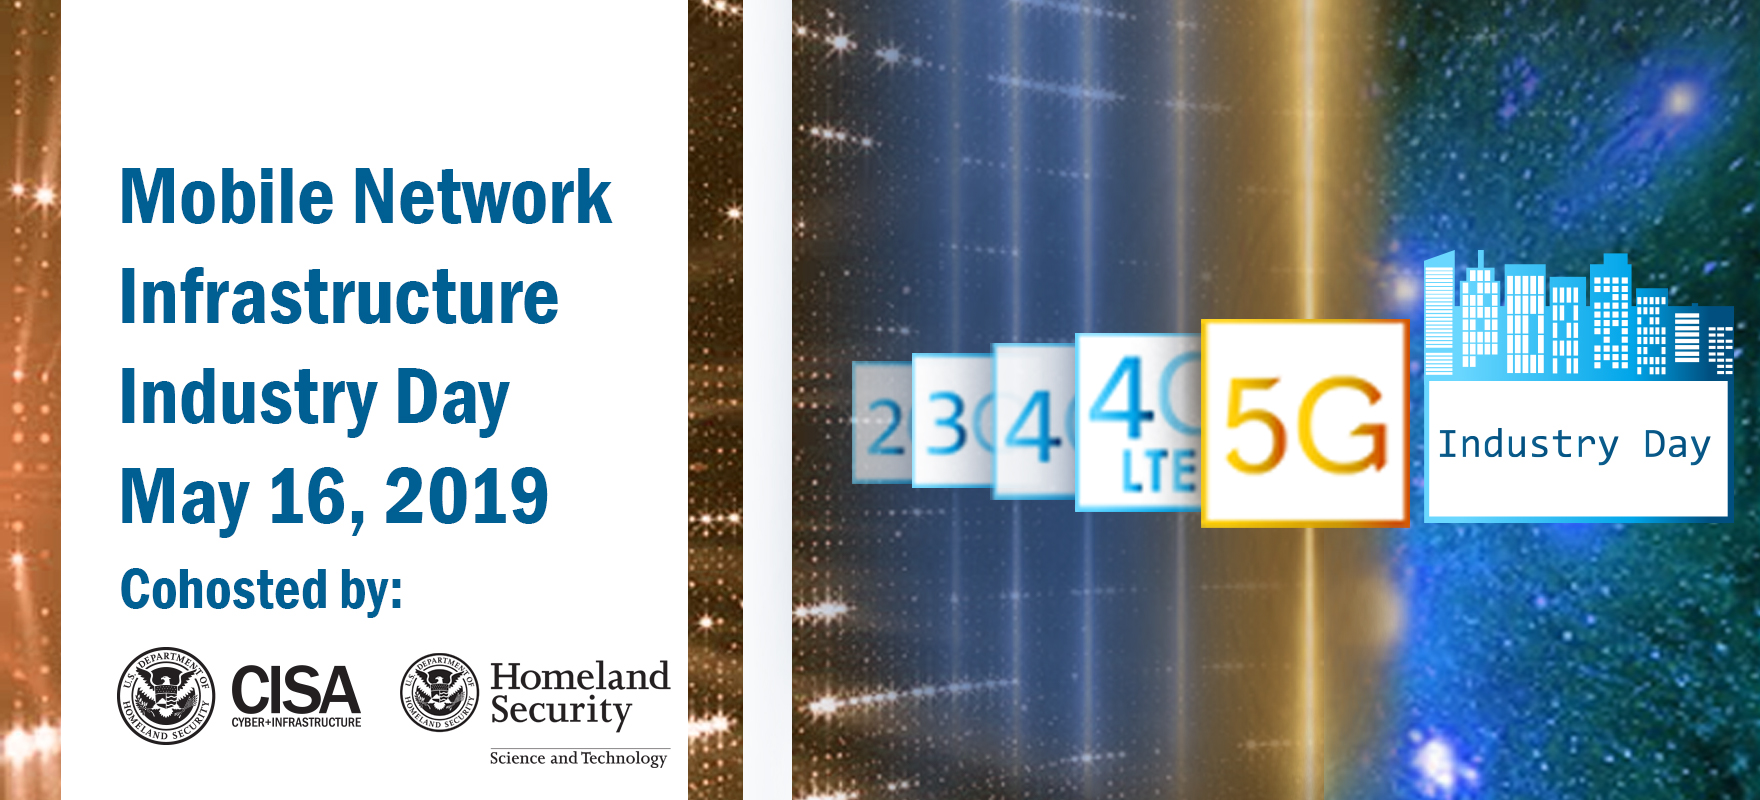 Mobile Network Infrastructure Industry Day. May 16, 2019. Cohosted by: CISA and S&T. CISA and S&T logos. 5G Industry Day.